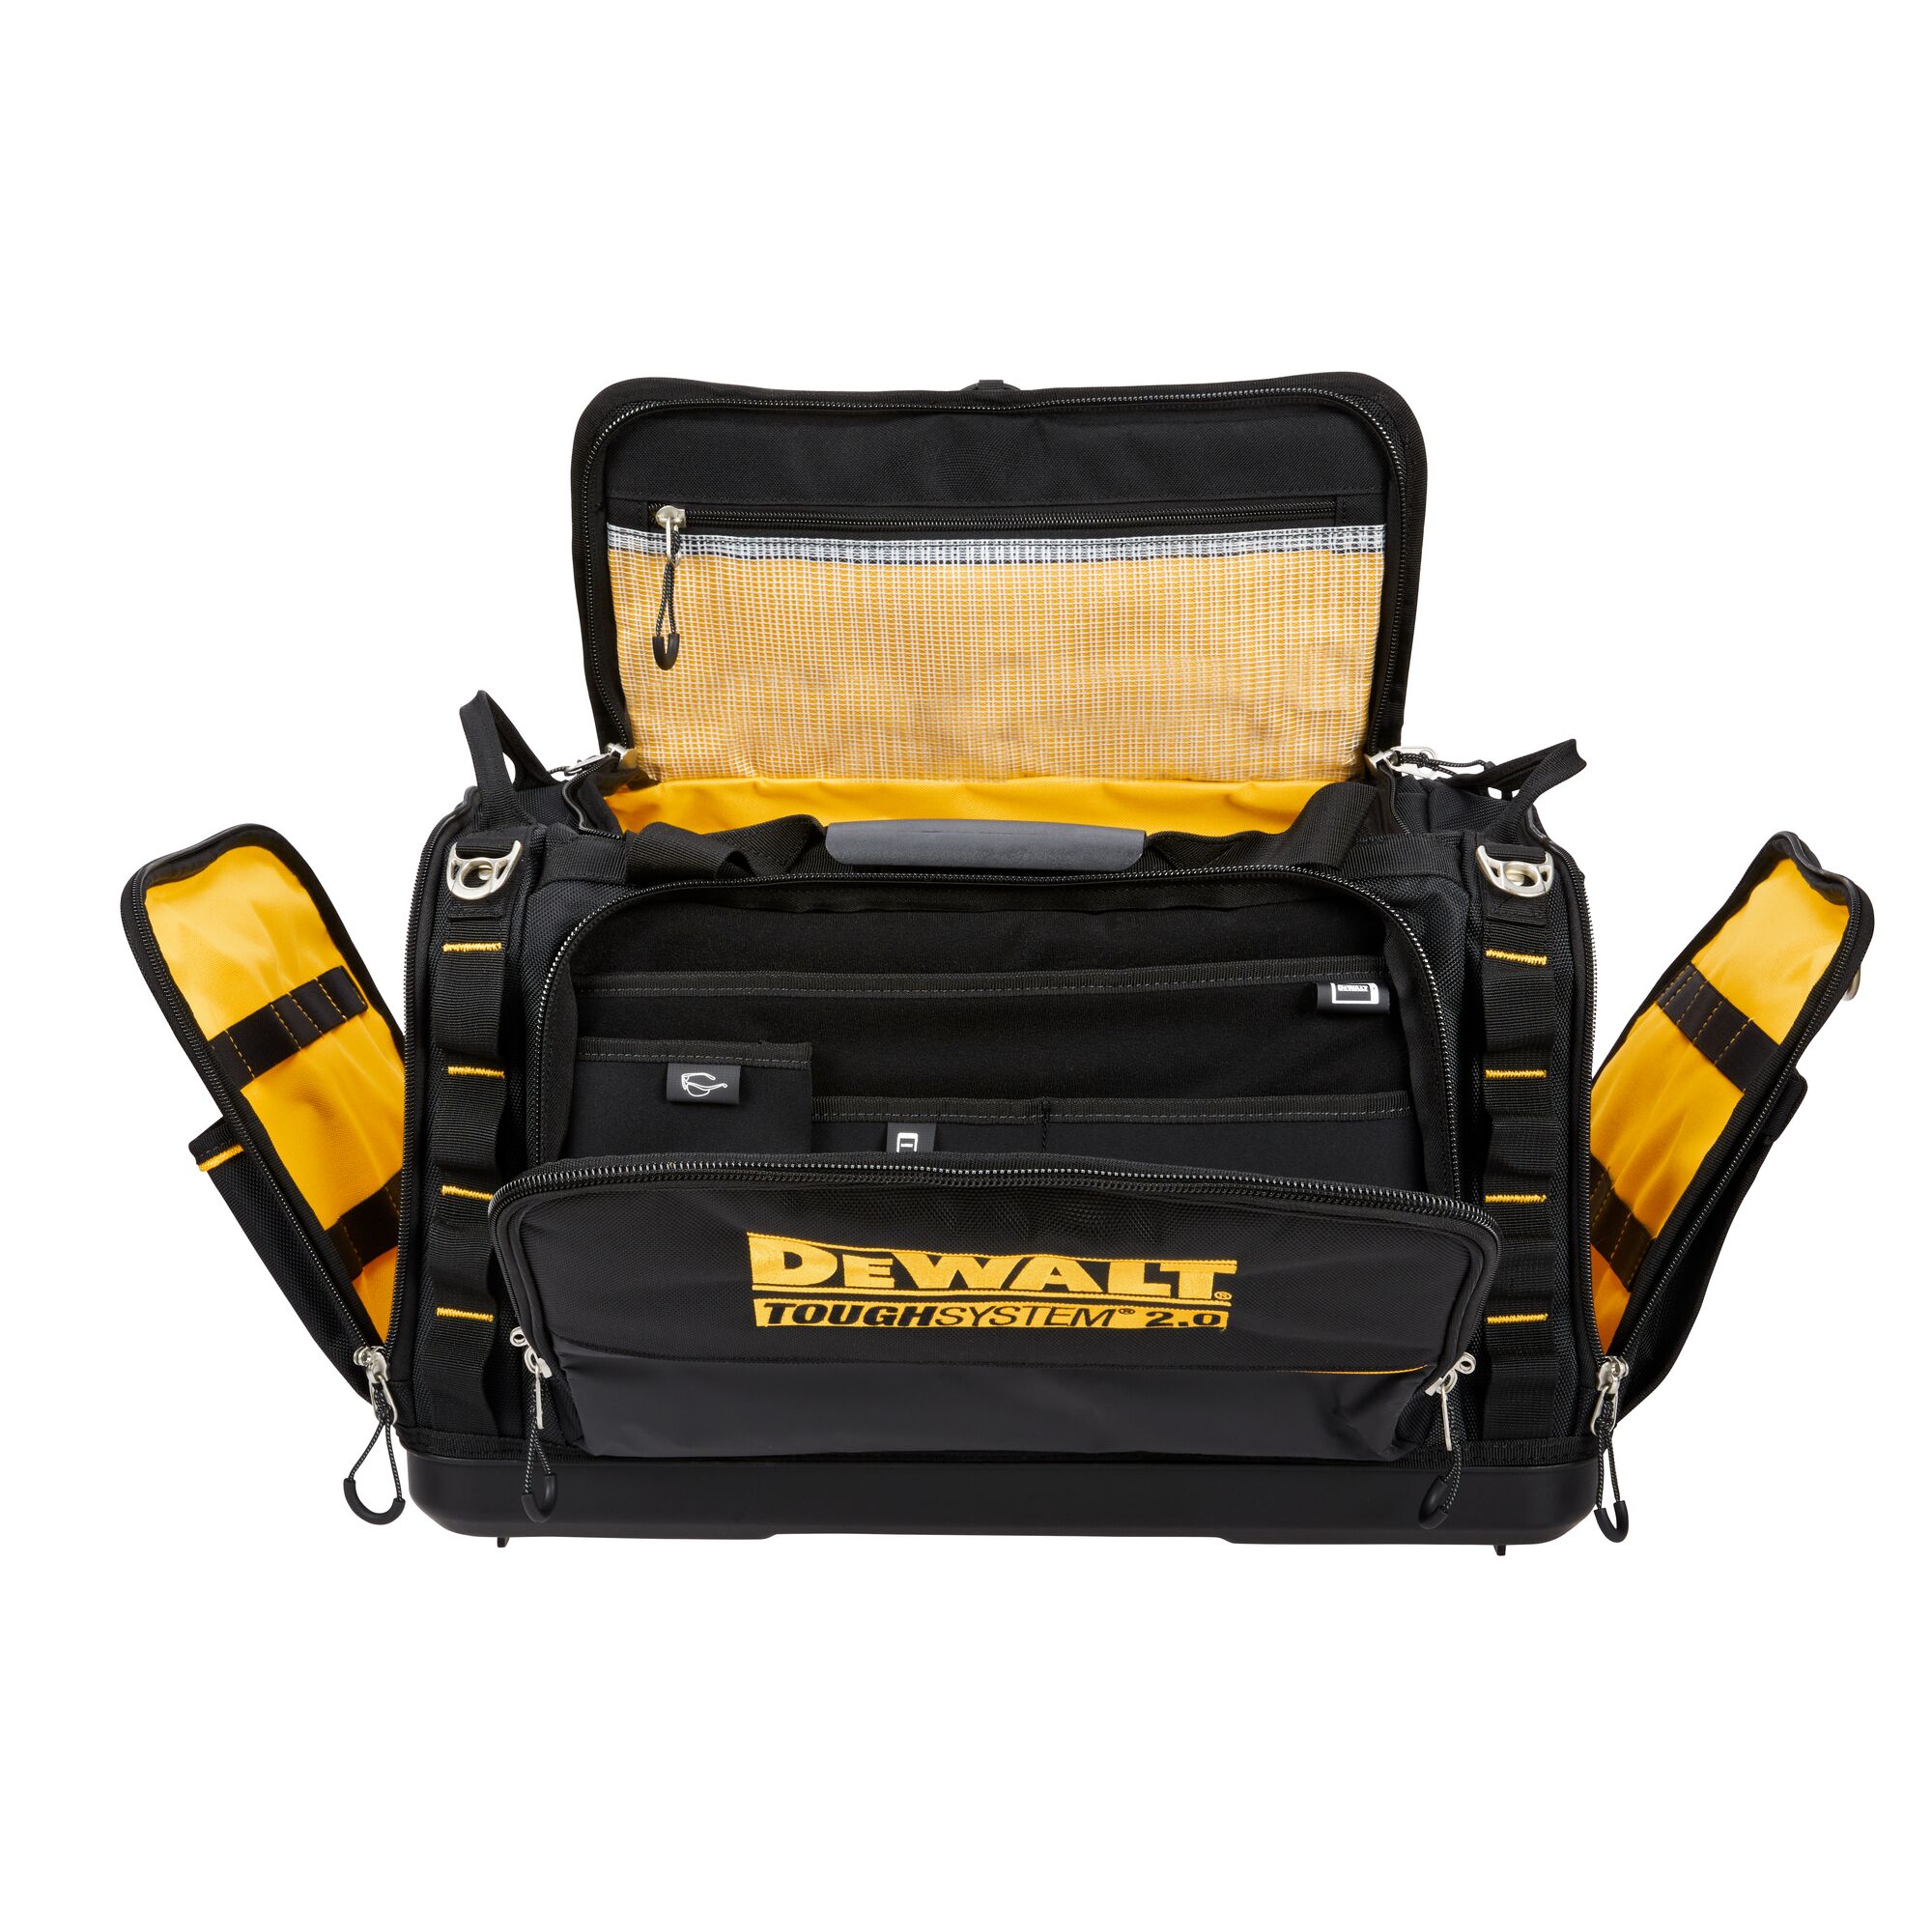 Dewalt Heavy Duty Tool Bag for power tools 18inch Bag yellow and black 2 Pack 